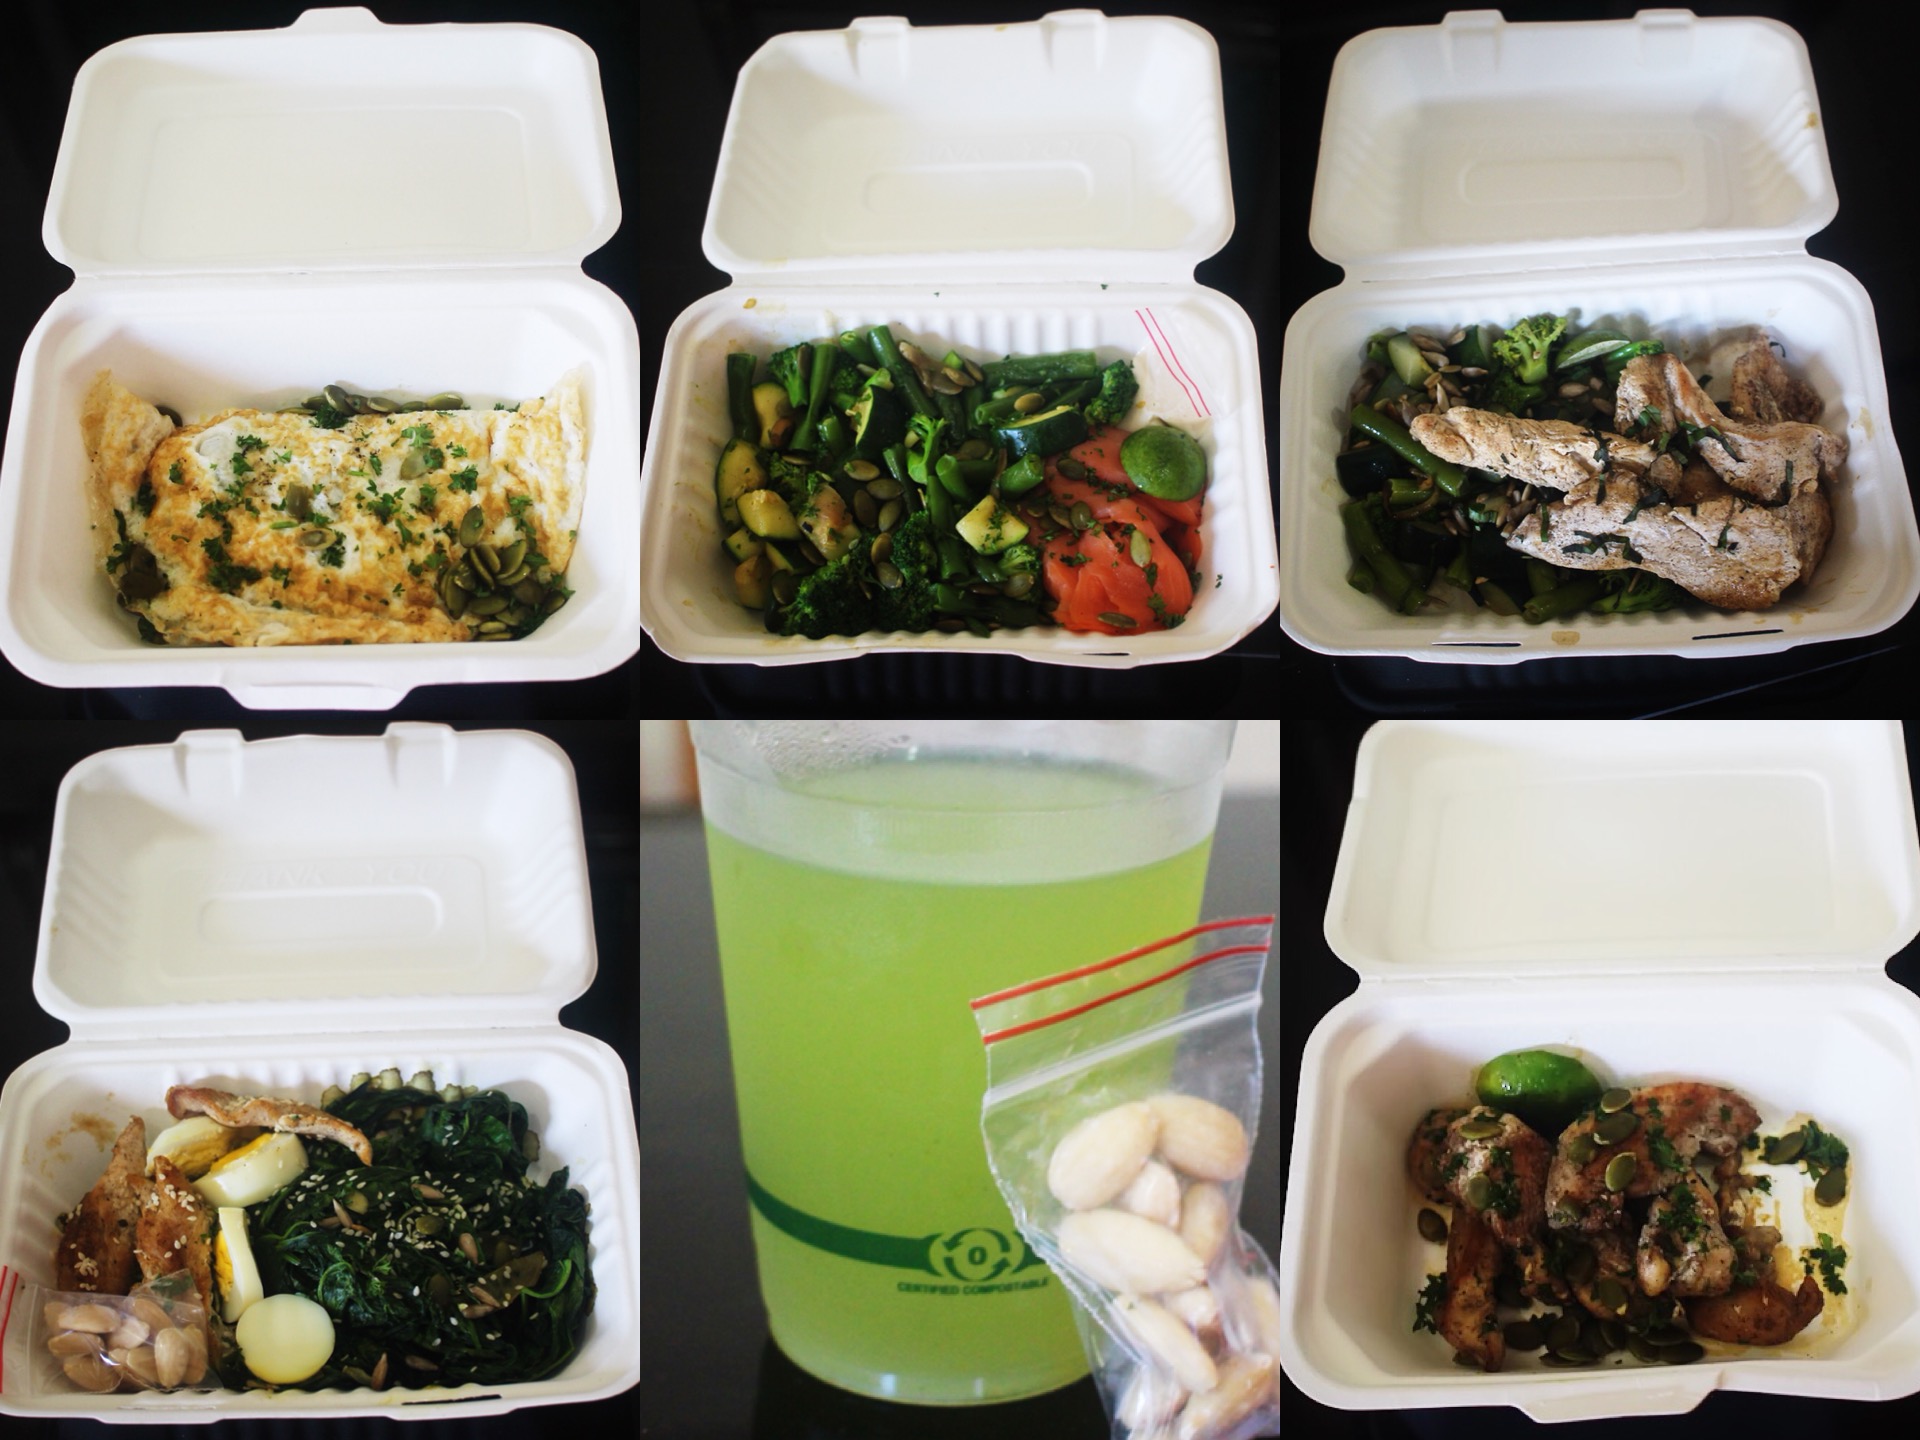 Meals from Motion Bali’s Skinny Protein and Shredding diets meal plans. Photos: Coconuts Bali